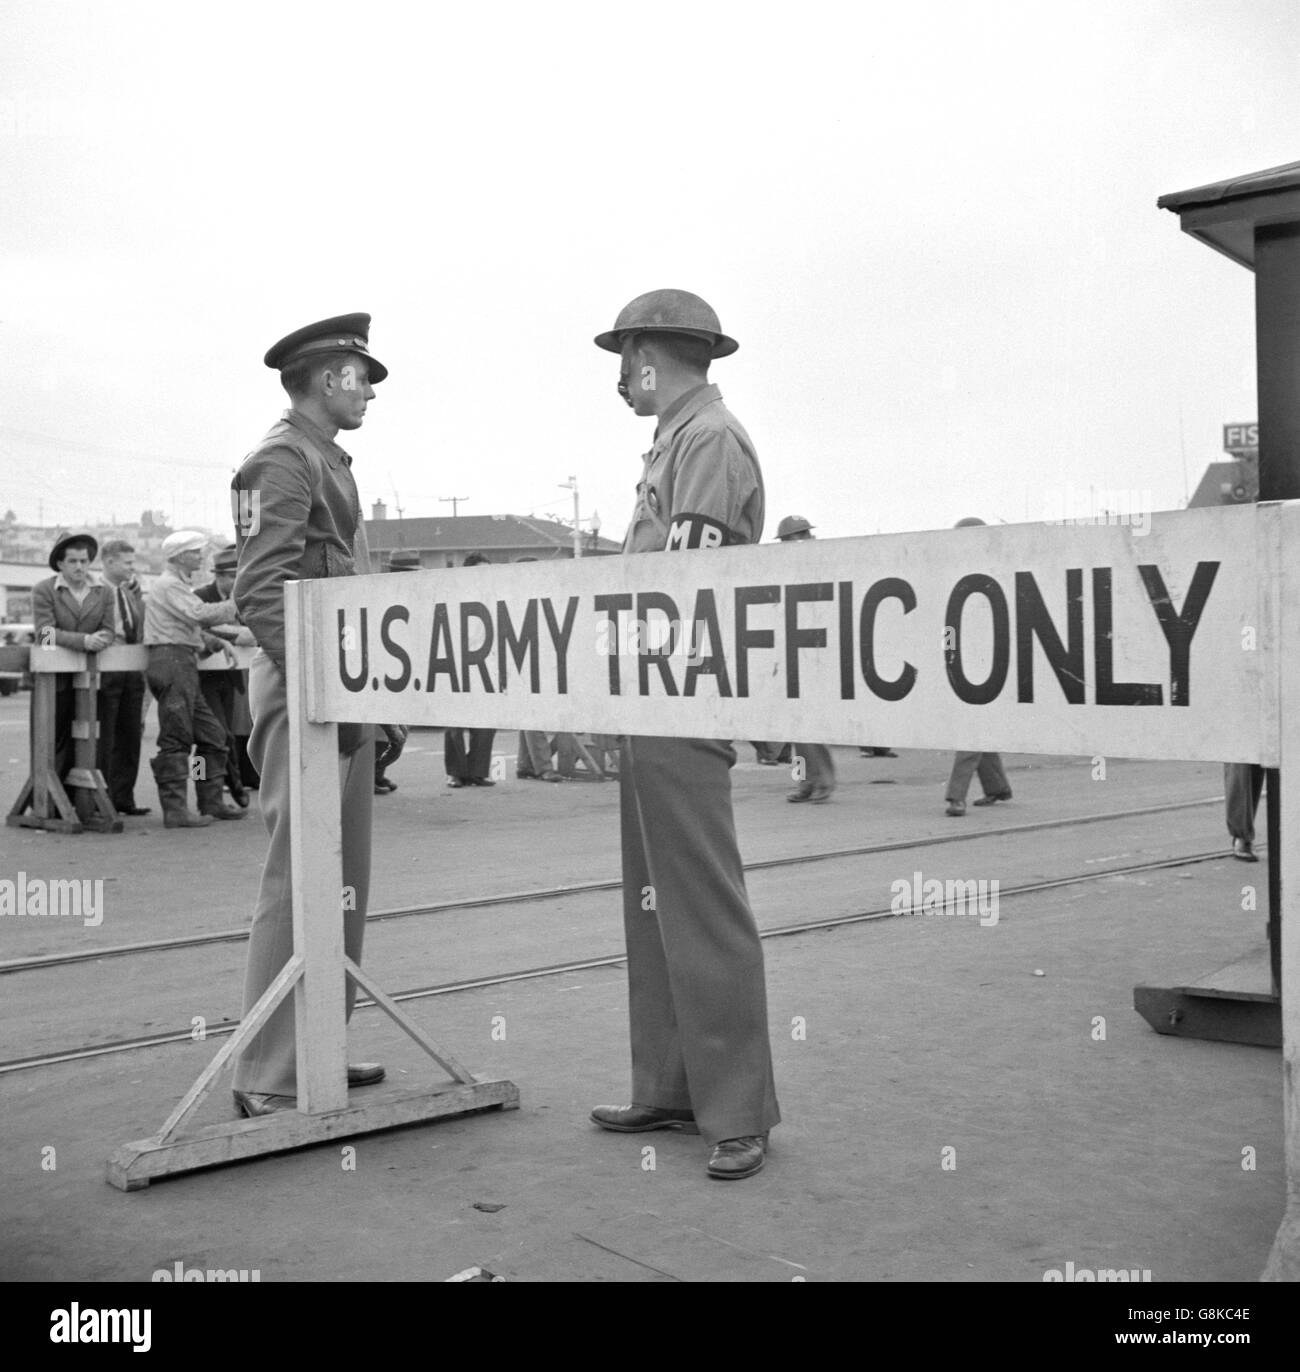 Army Sentries Standing Guard at Transport Dock one day after Japanese Attack on Pearl Harbor, San Francisco, California, USA, John Collier for Office of War Information, December 8, 1941 Stock Photo